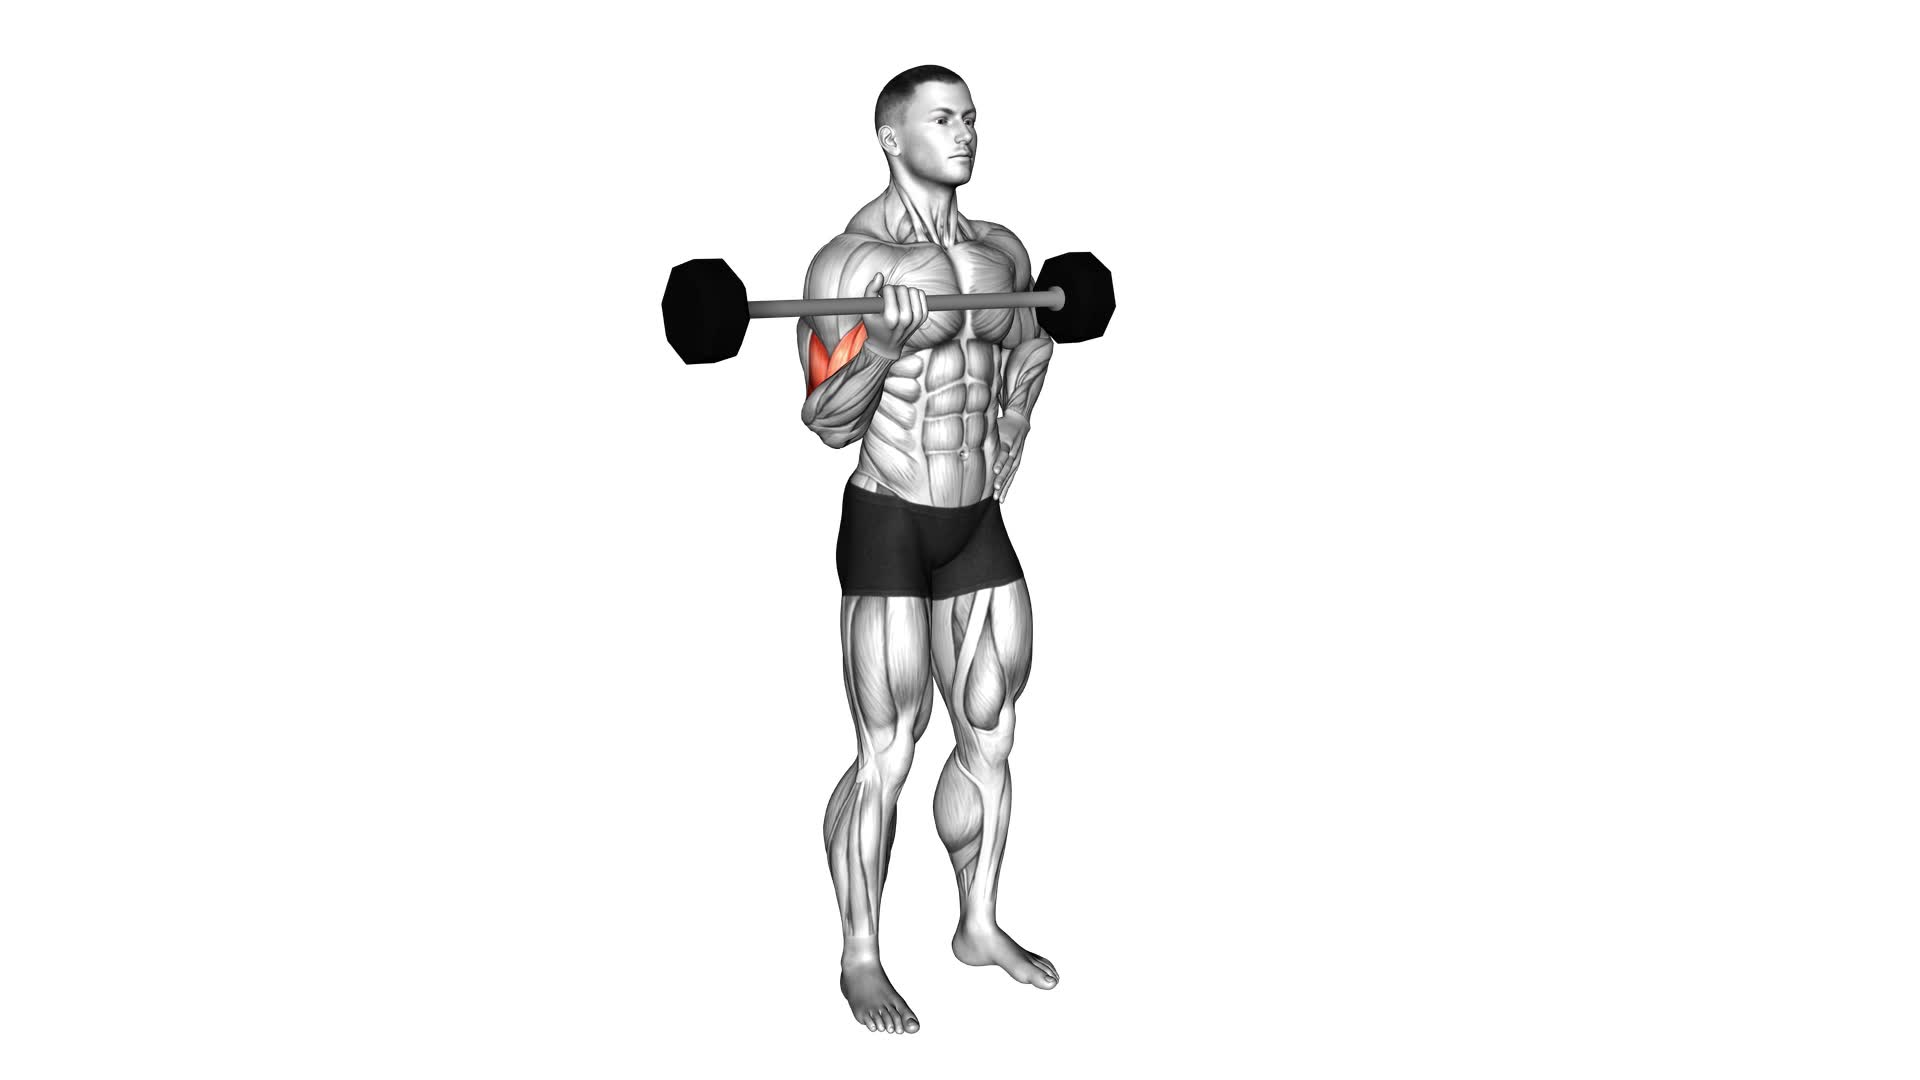 Barbell Alternate Biceps Curl - Video Exercise Guide & Tips